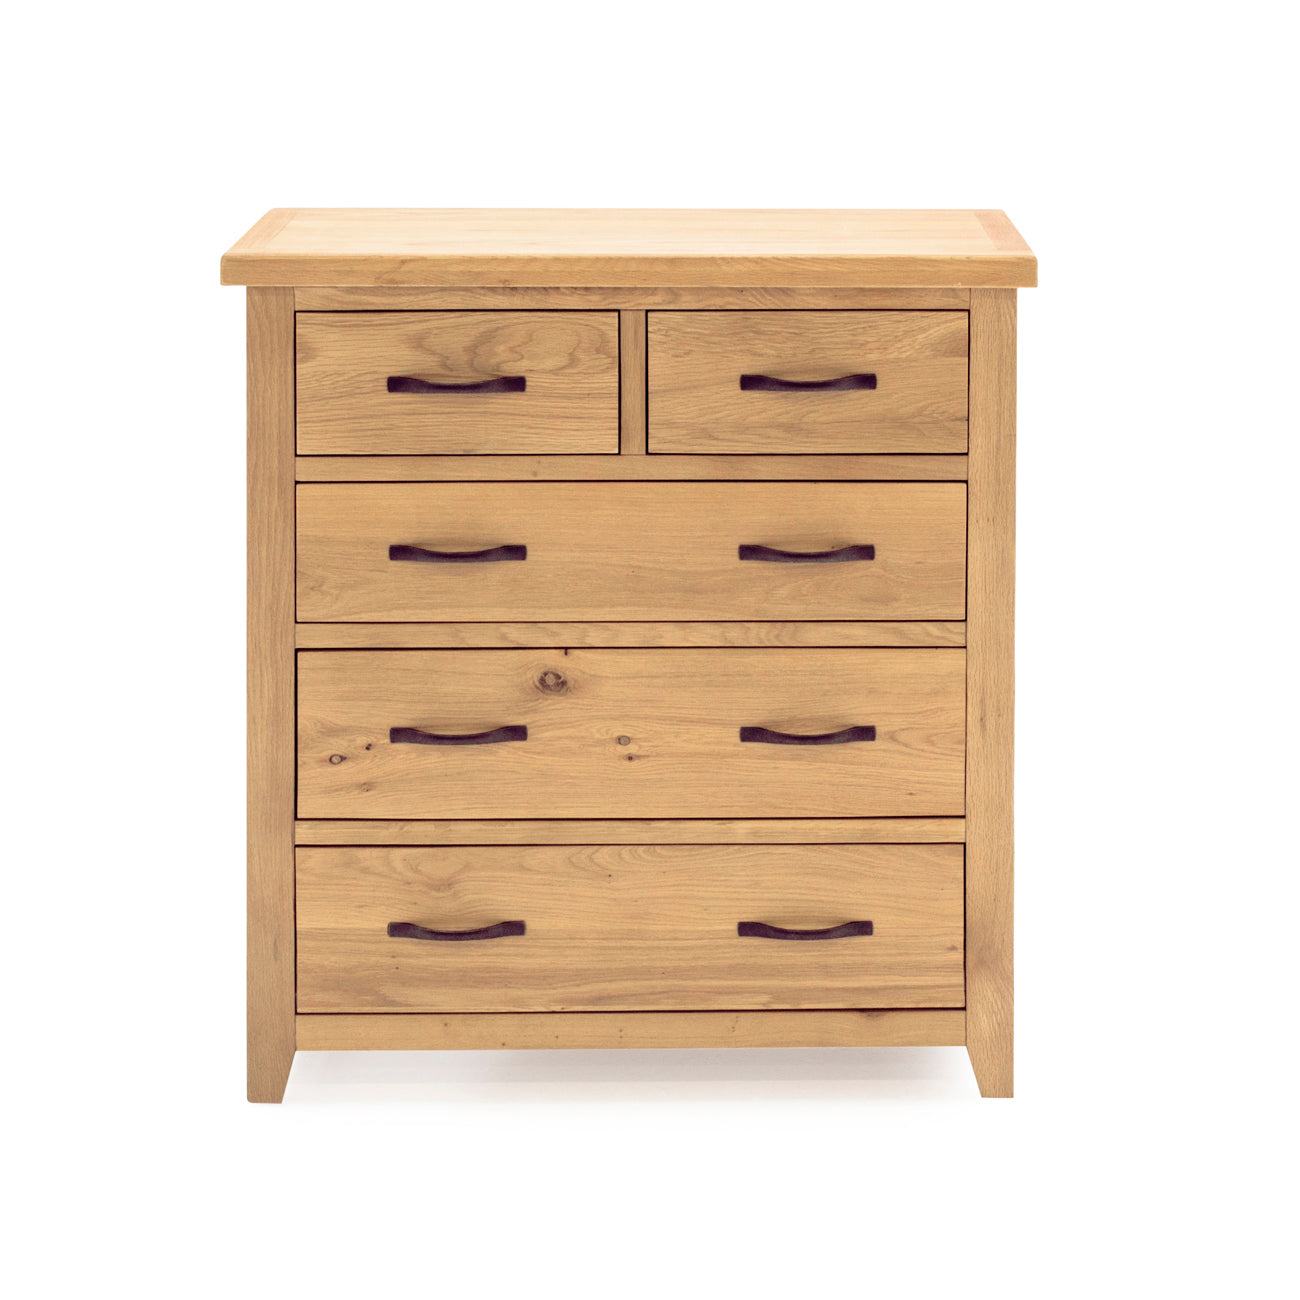 Ramore Tall Chest - 5 Drawer